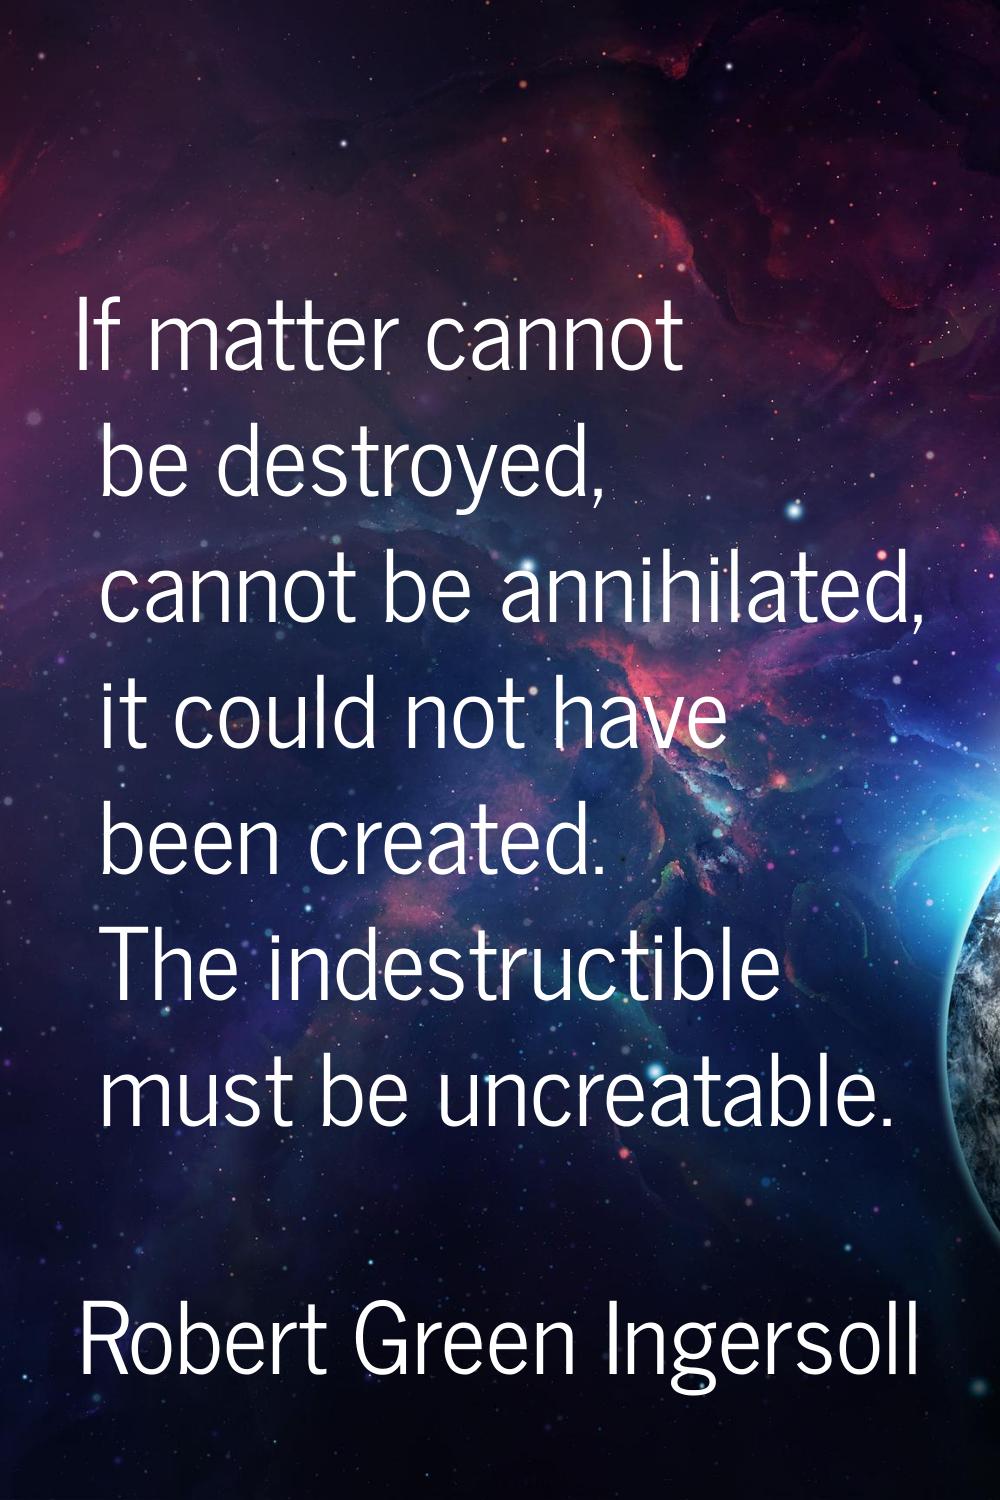 If matter cannot be destroyed, cannot be annihilated, it could not have been created. The indestruc